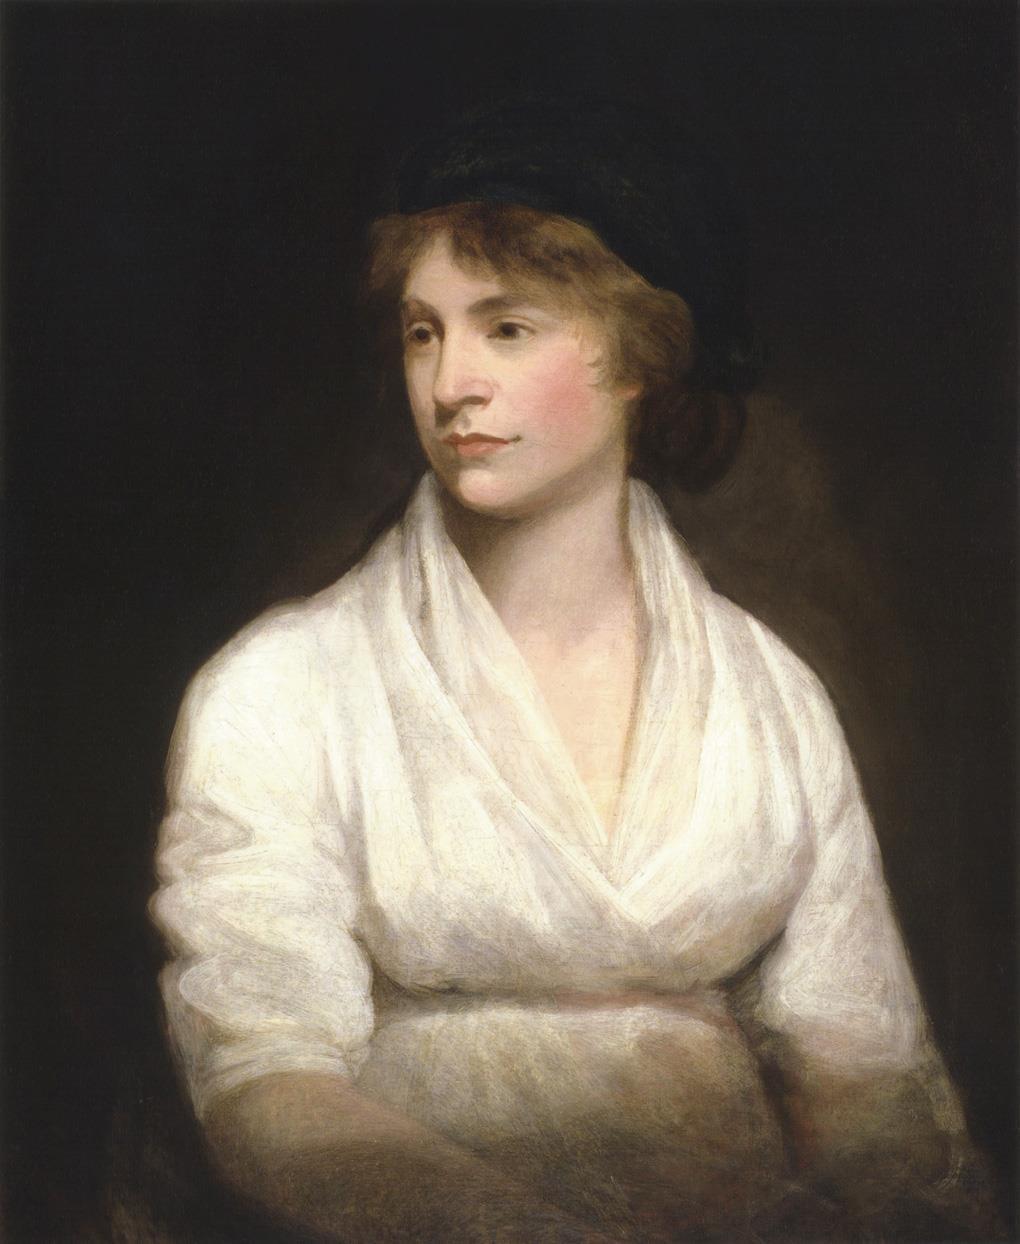 New Views on Society Writer: Mary Wollstonecraft (English) Work: A Vindication of the